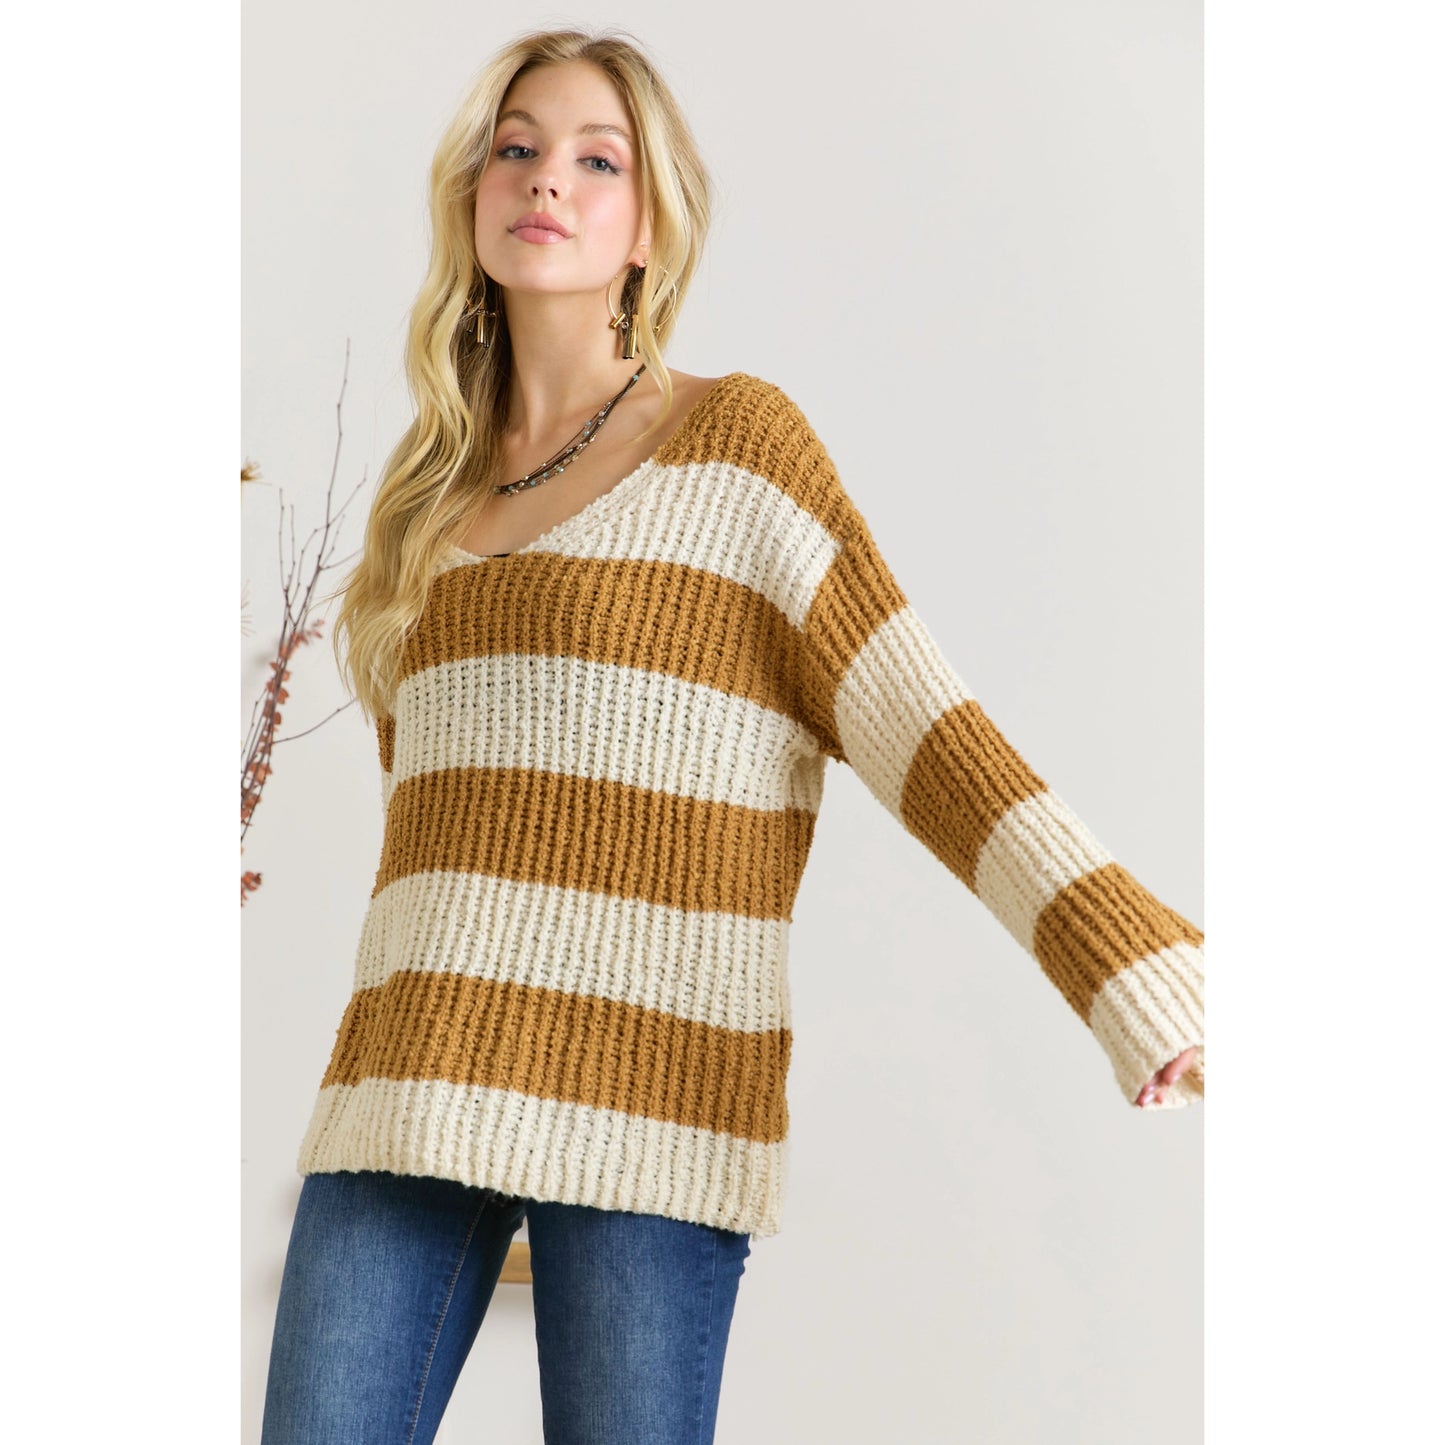 Camel/Beige V Neck Striped Sweater With Bell Sleeves